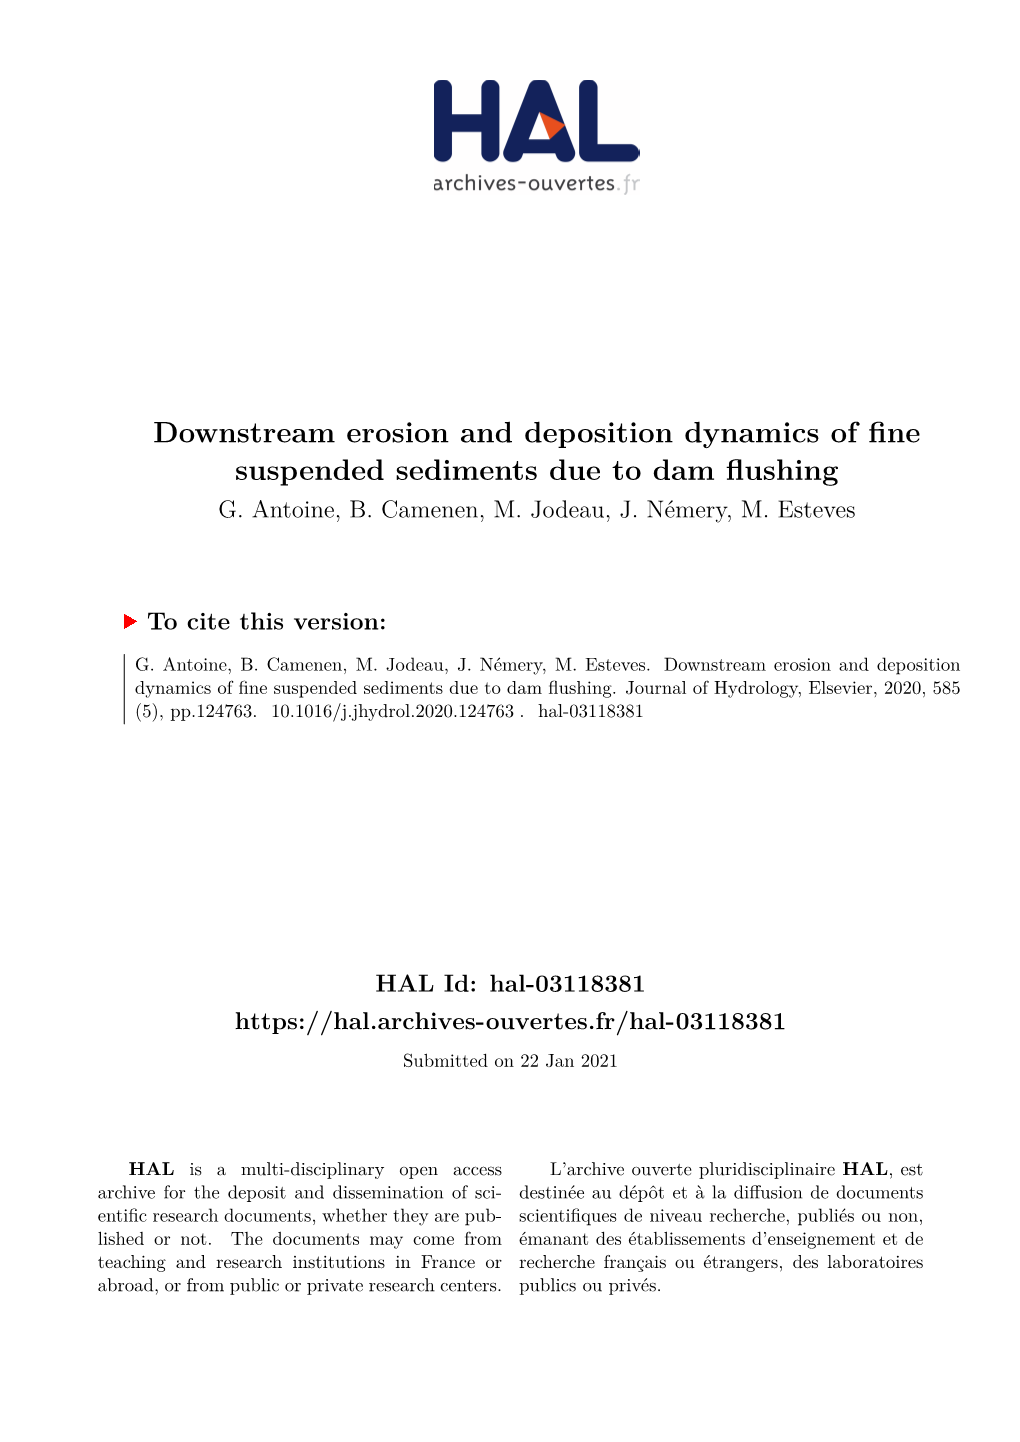 Downstream Erosion and Deposition Dynamics of Fine Suspended Sediments Due to Dam Flushing G